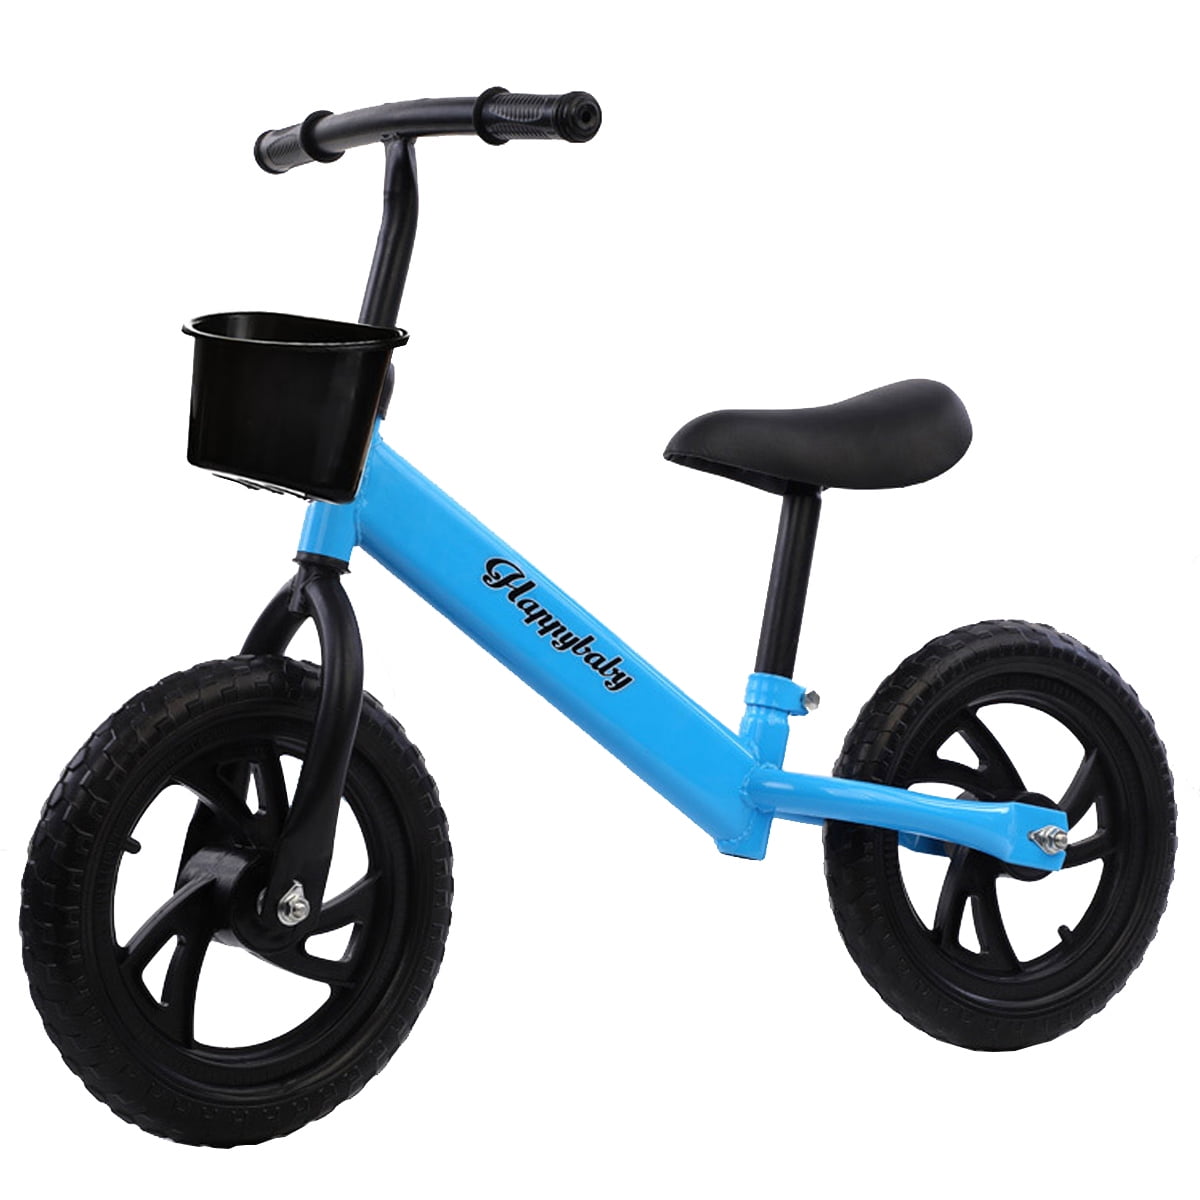 Details about   Kids Balance Bike No Pedal Childs Training Bicycle Toy Infant Beginner Plastic 